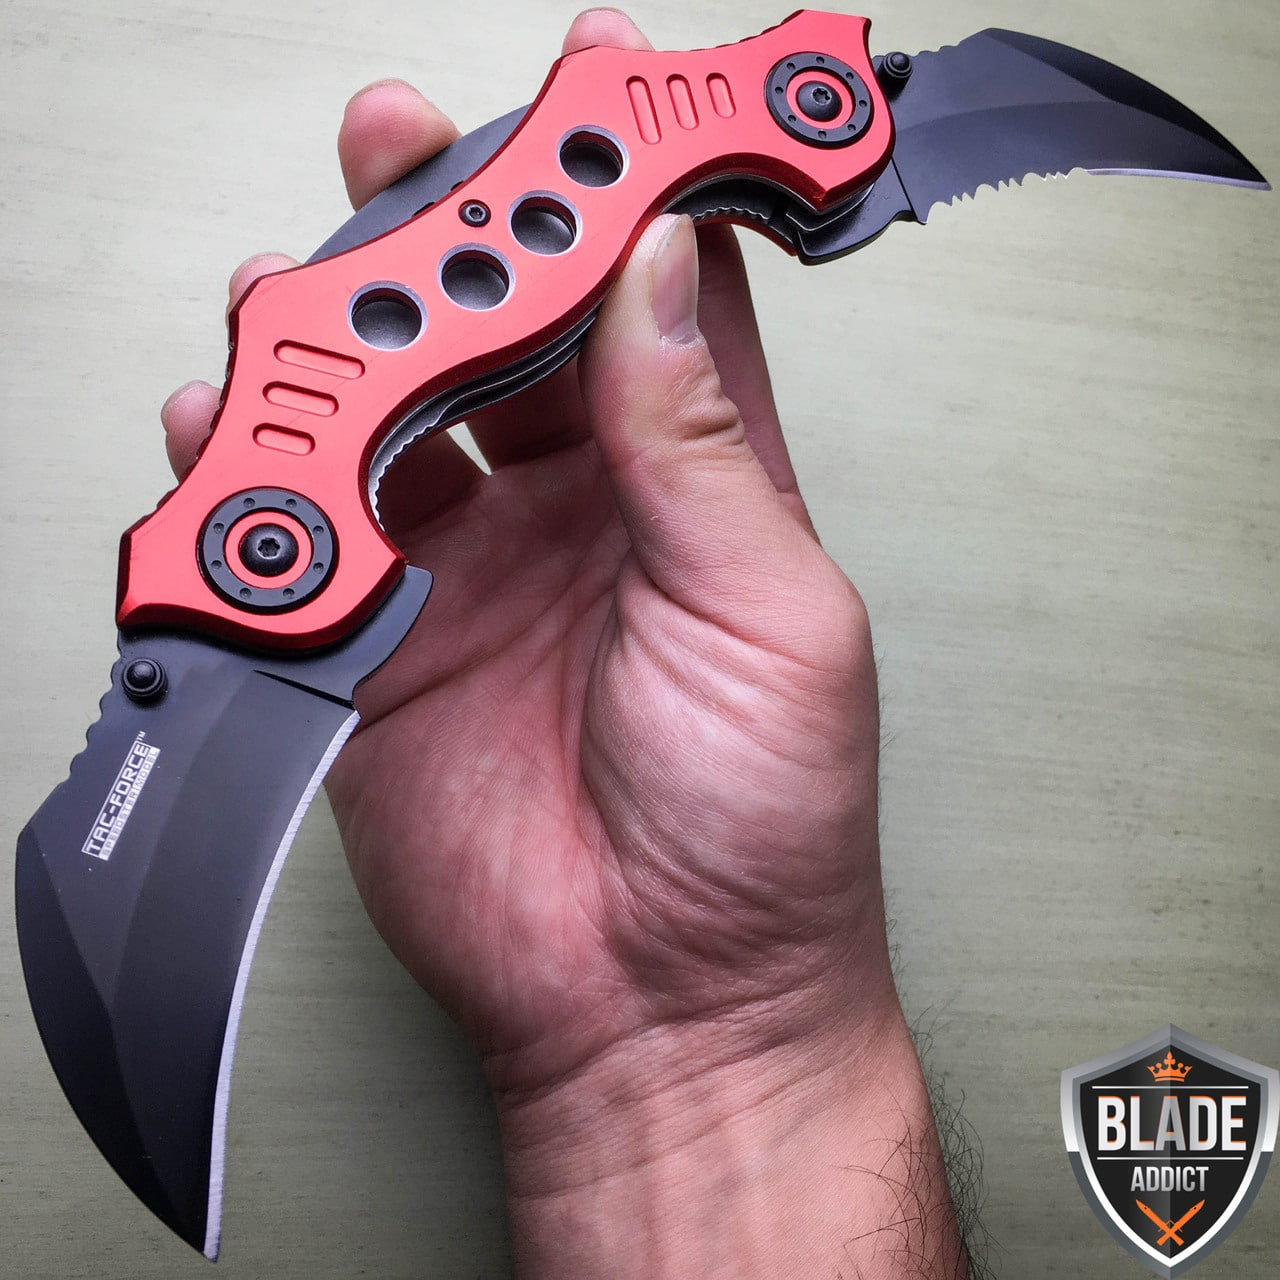 TWIN DUAL BLADE Karambit Claw SPRING ASSISTED OPEN Combat Folding POCKET KNIFE